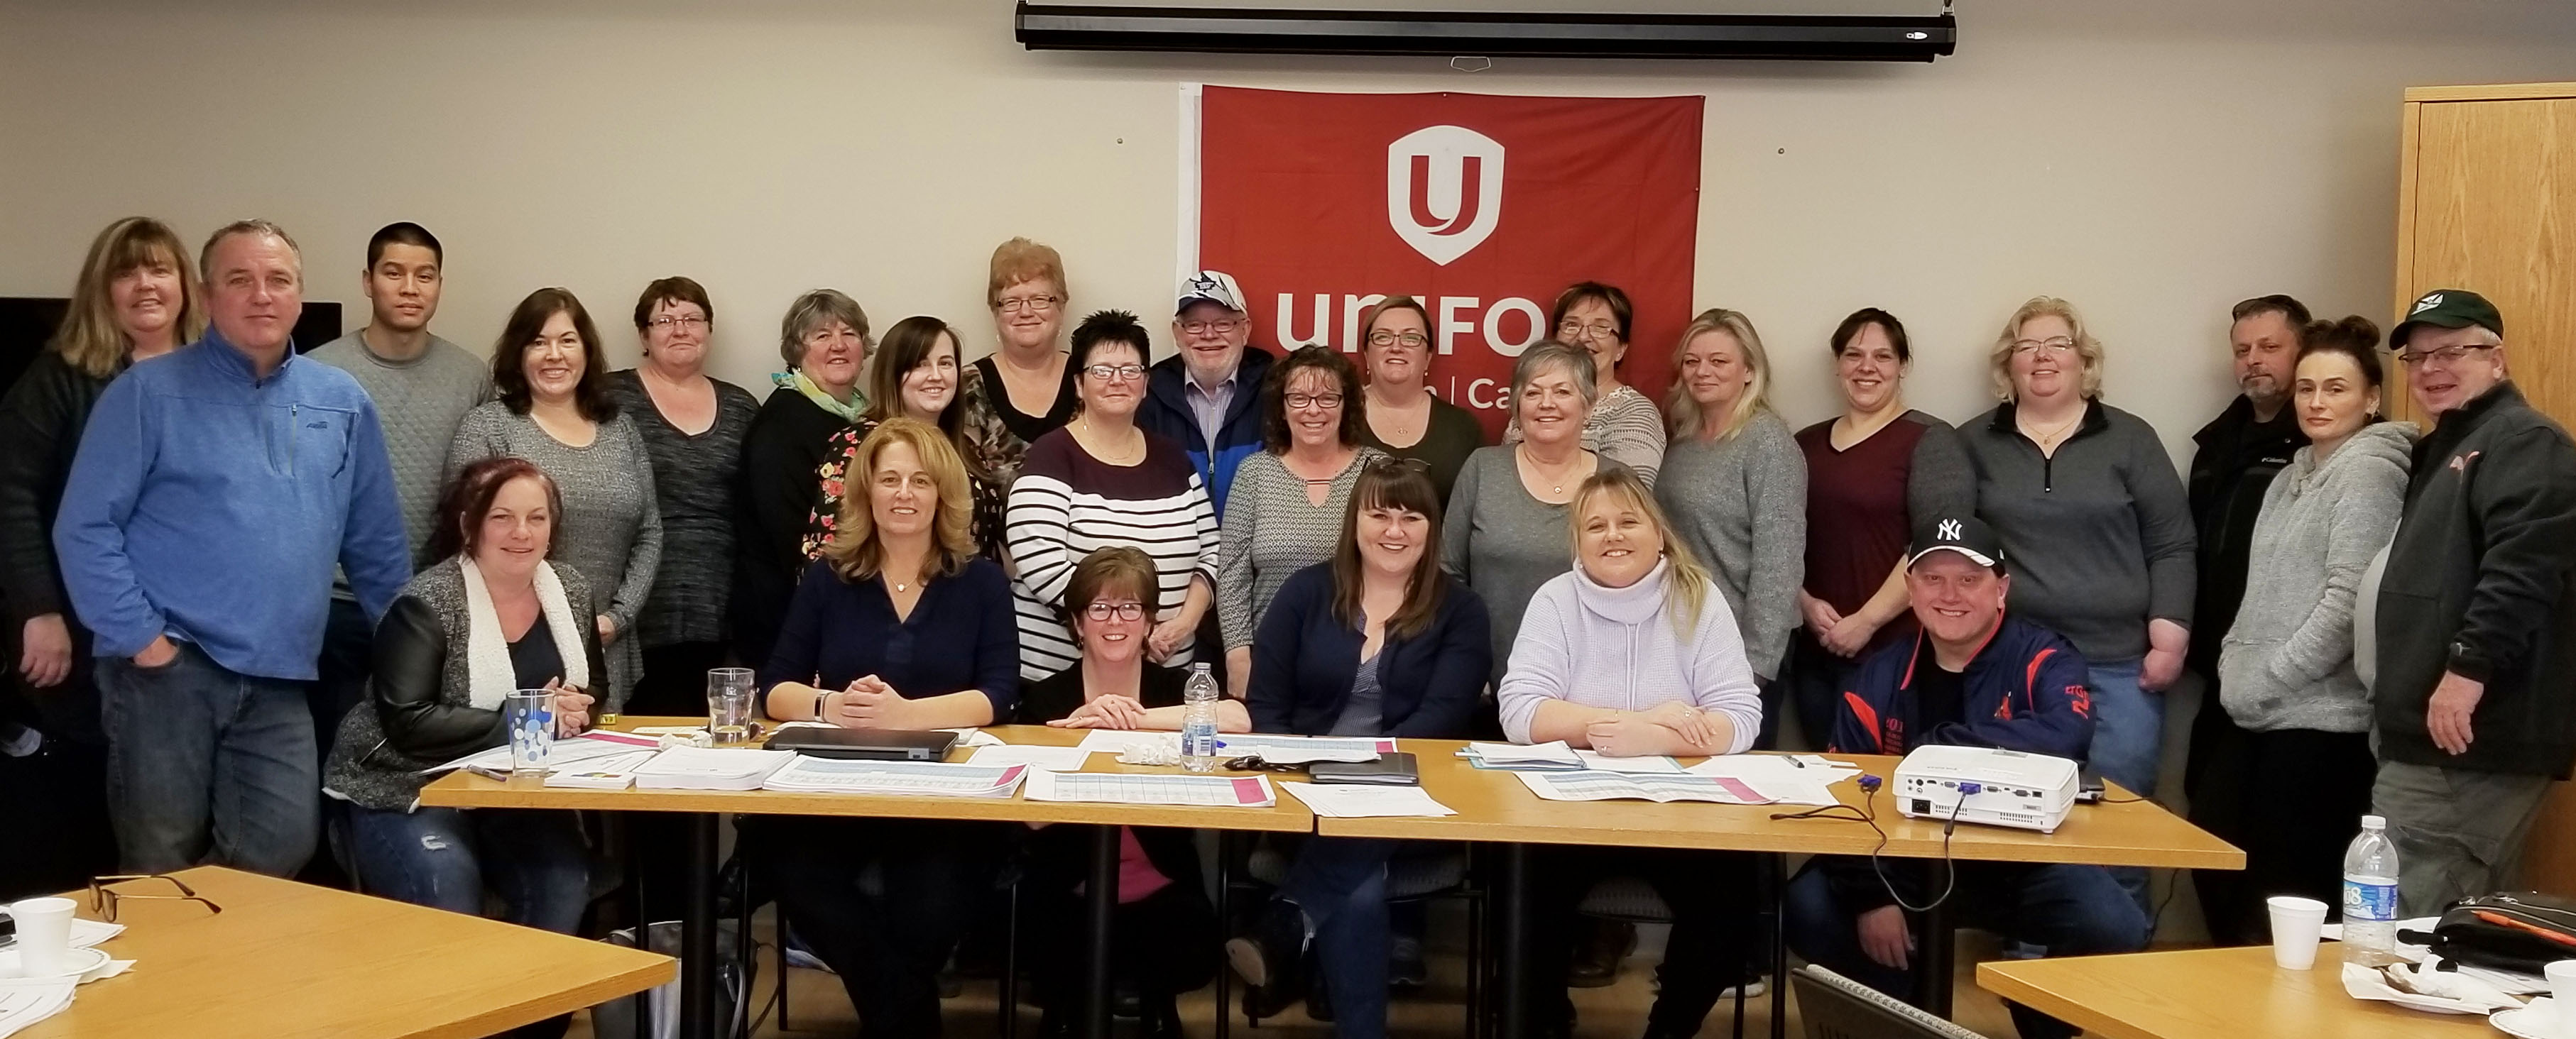 Katha Fortier and Linda MacNeil with Unifor members representing Nova Scotia health care workers.